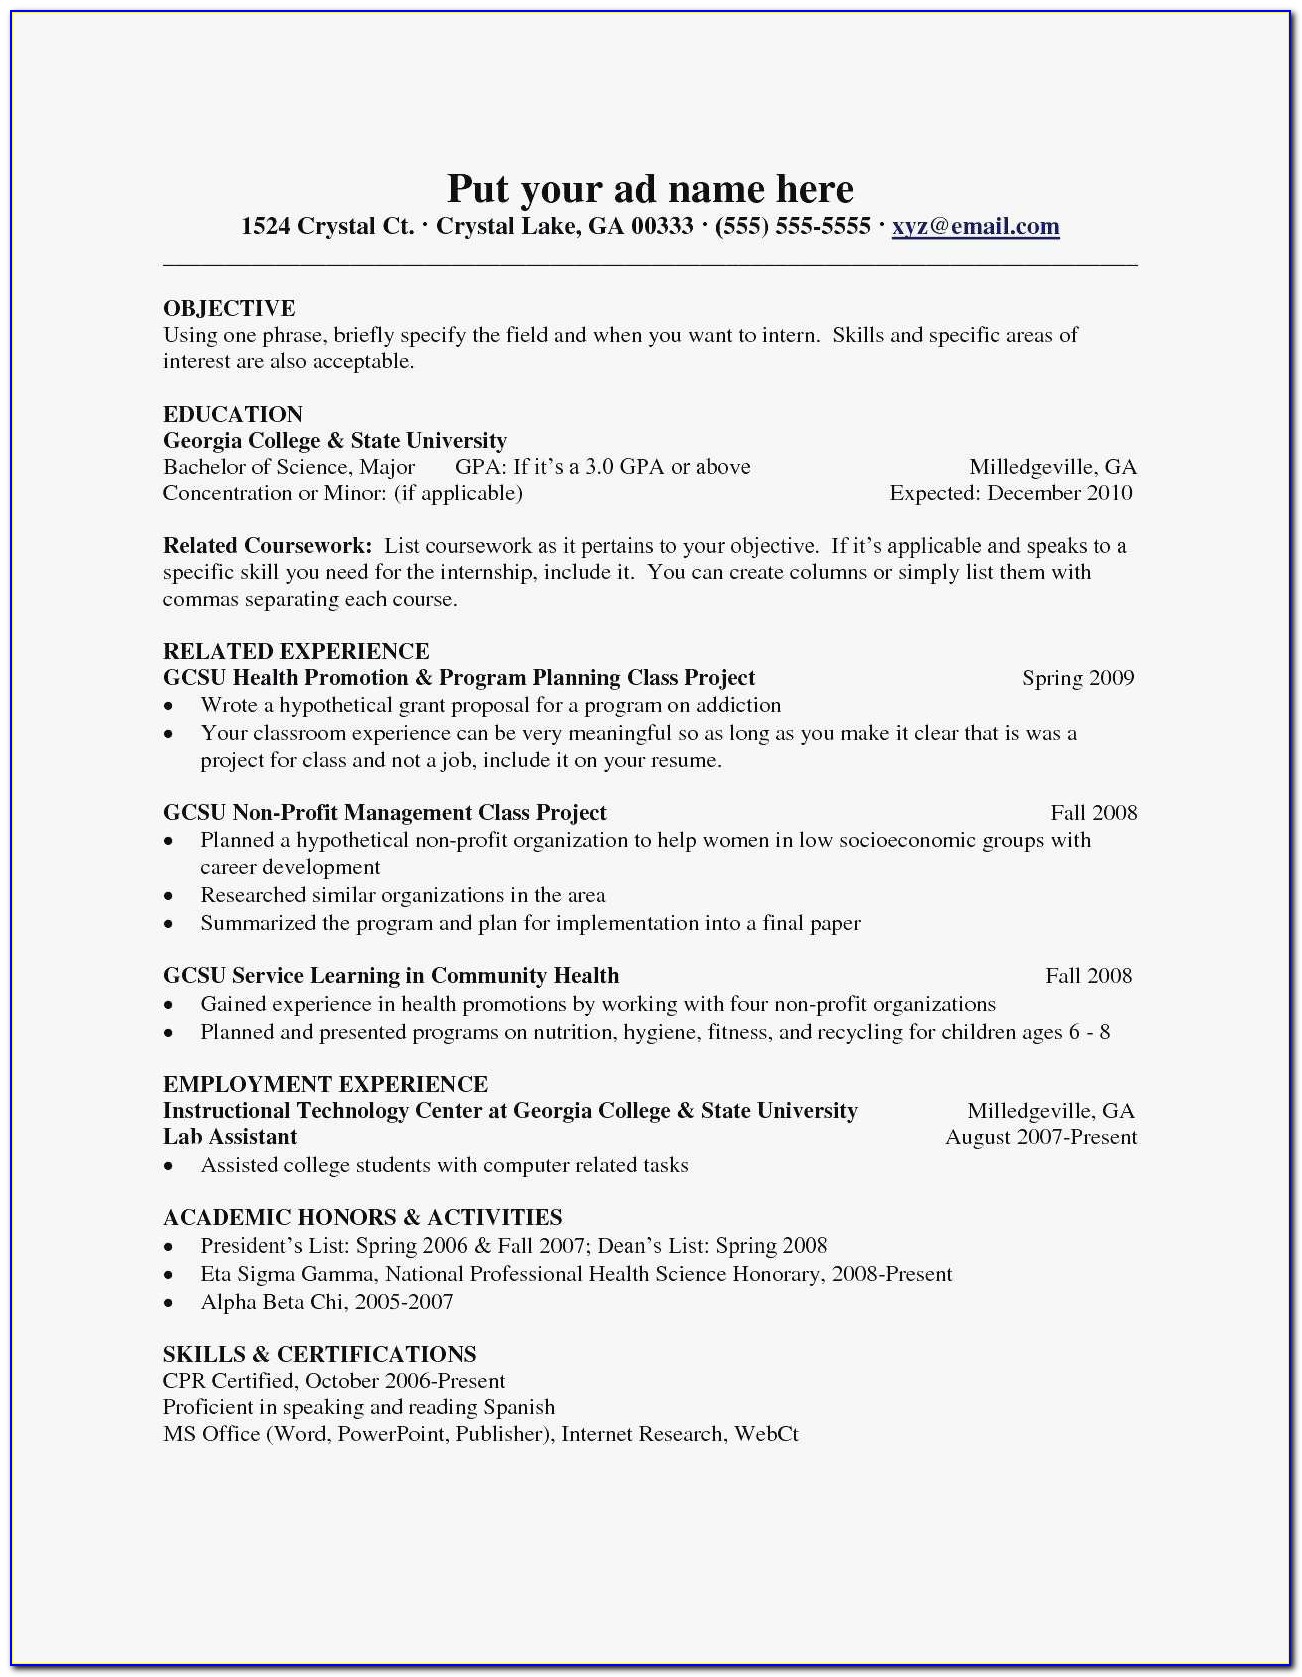 Sample Revenue Sharing Agreement Template Luxury Attractive Profit Sharing Template Gift Professional Resume